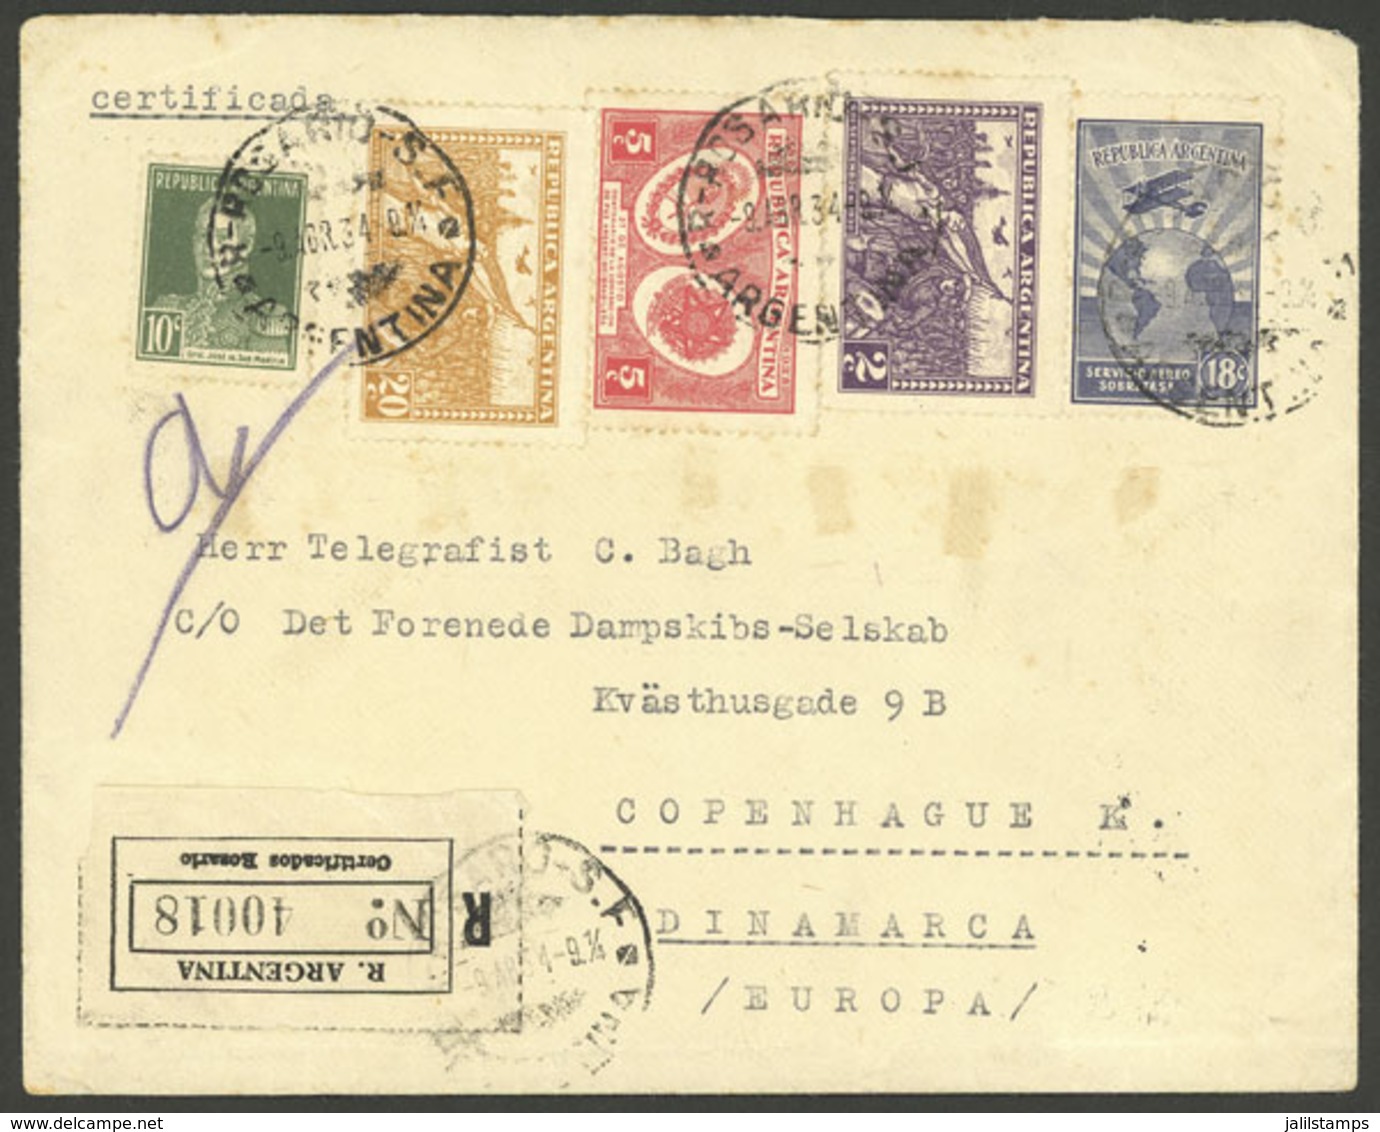 ARGENTINA: Registered Cover Sent From Rosario To Denmark On 9/AP/1935, Franked 55c. With Different Stamps, VF Quality - Briefe U. Dokumente